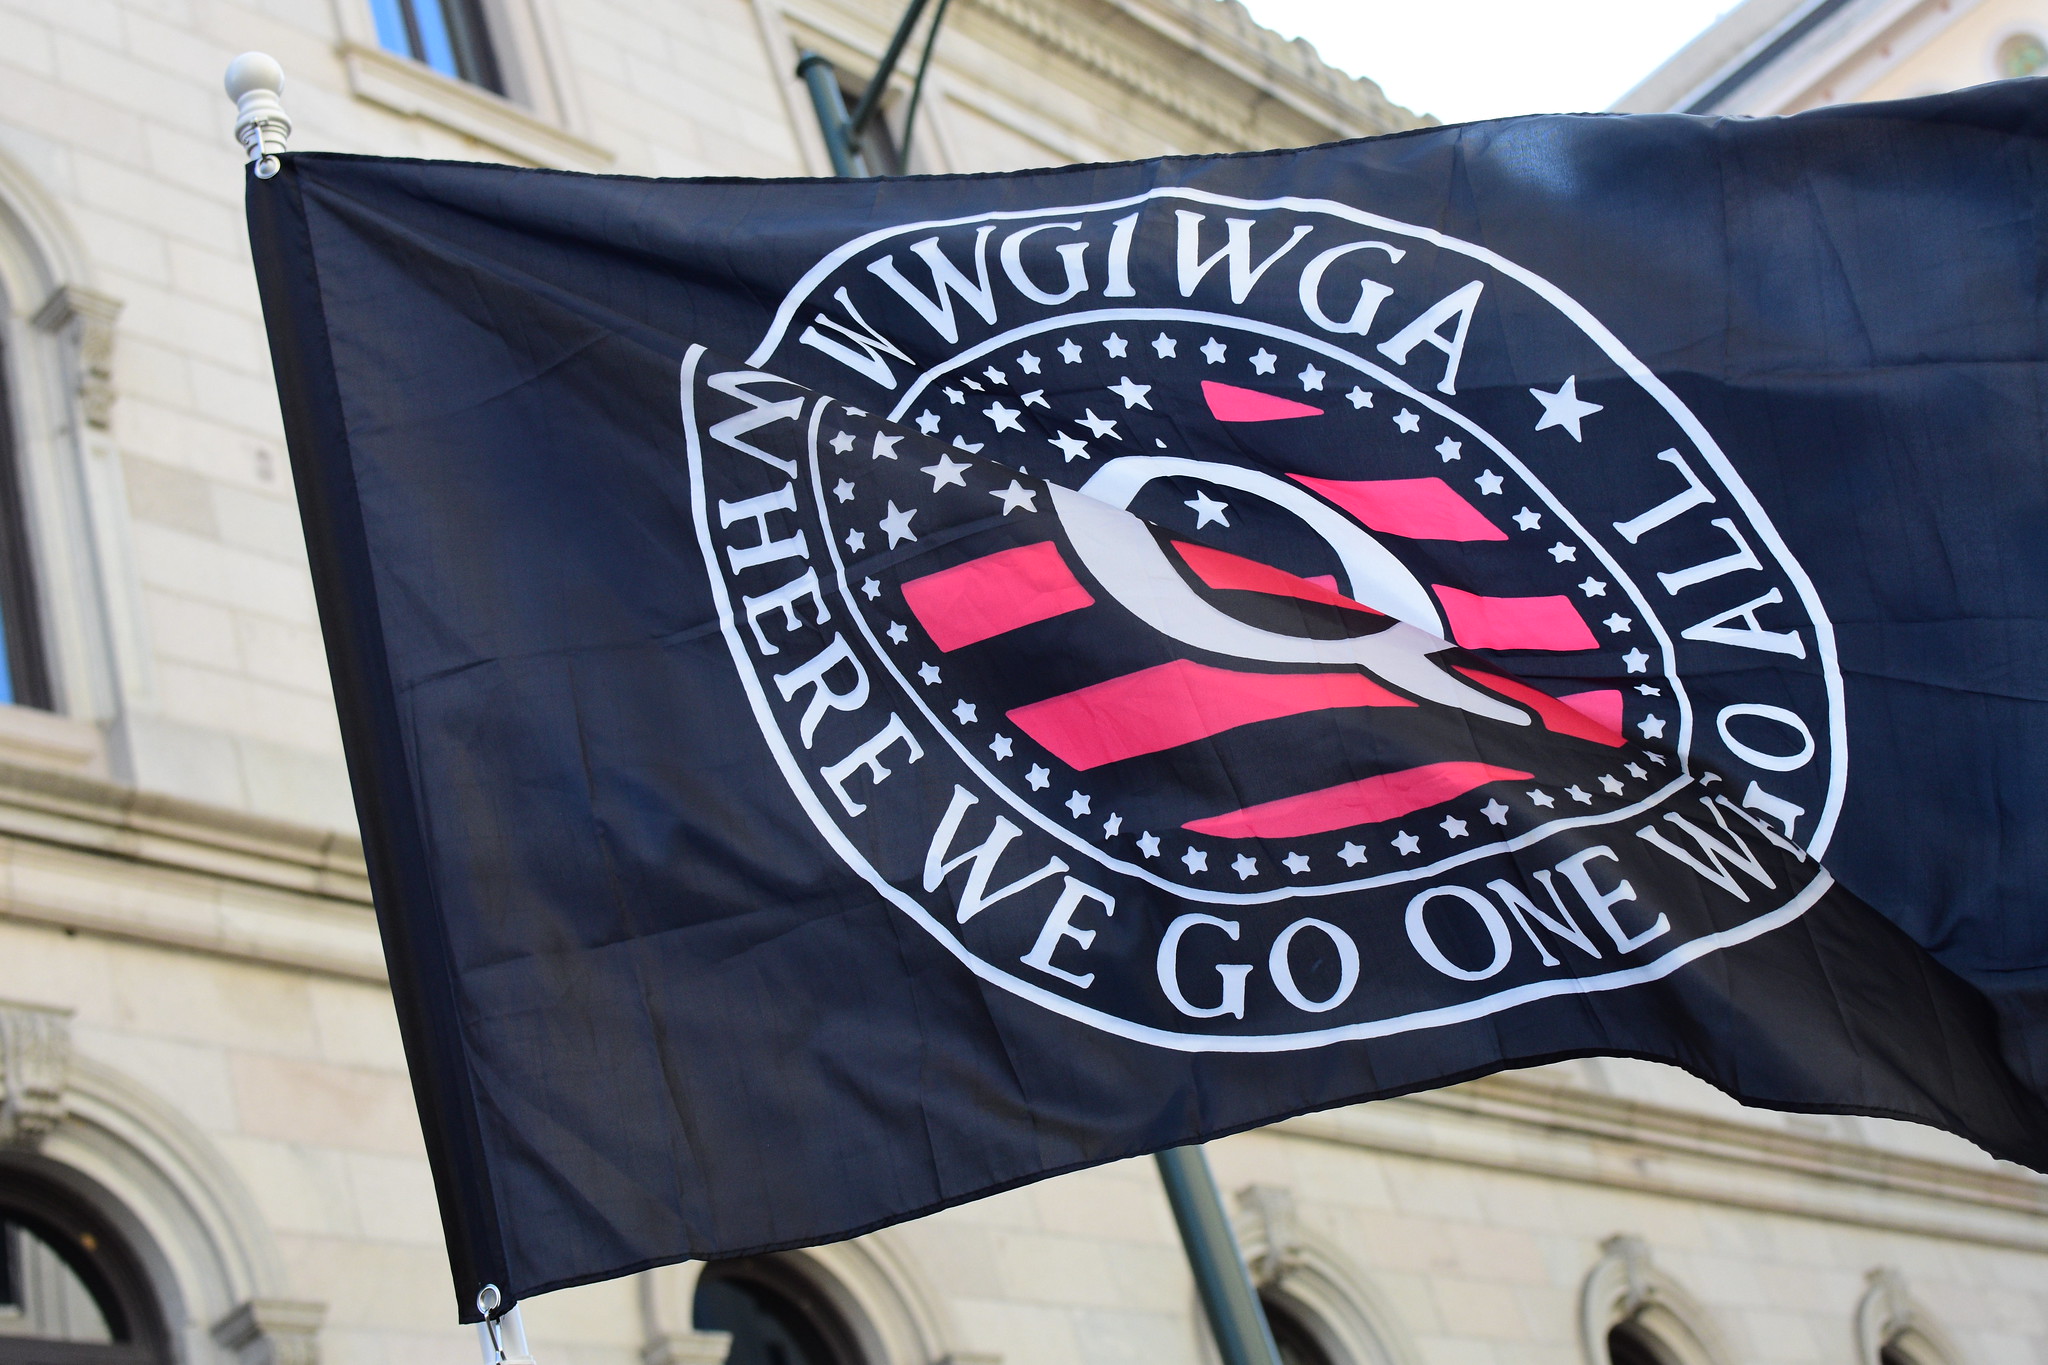 A QAnon flag. Photo by Anthony Crider. (CC BY 2.0 DEED) https://creativecommons.org/licenses/by/2.0/